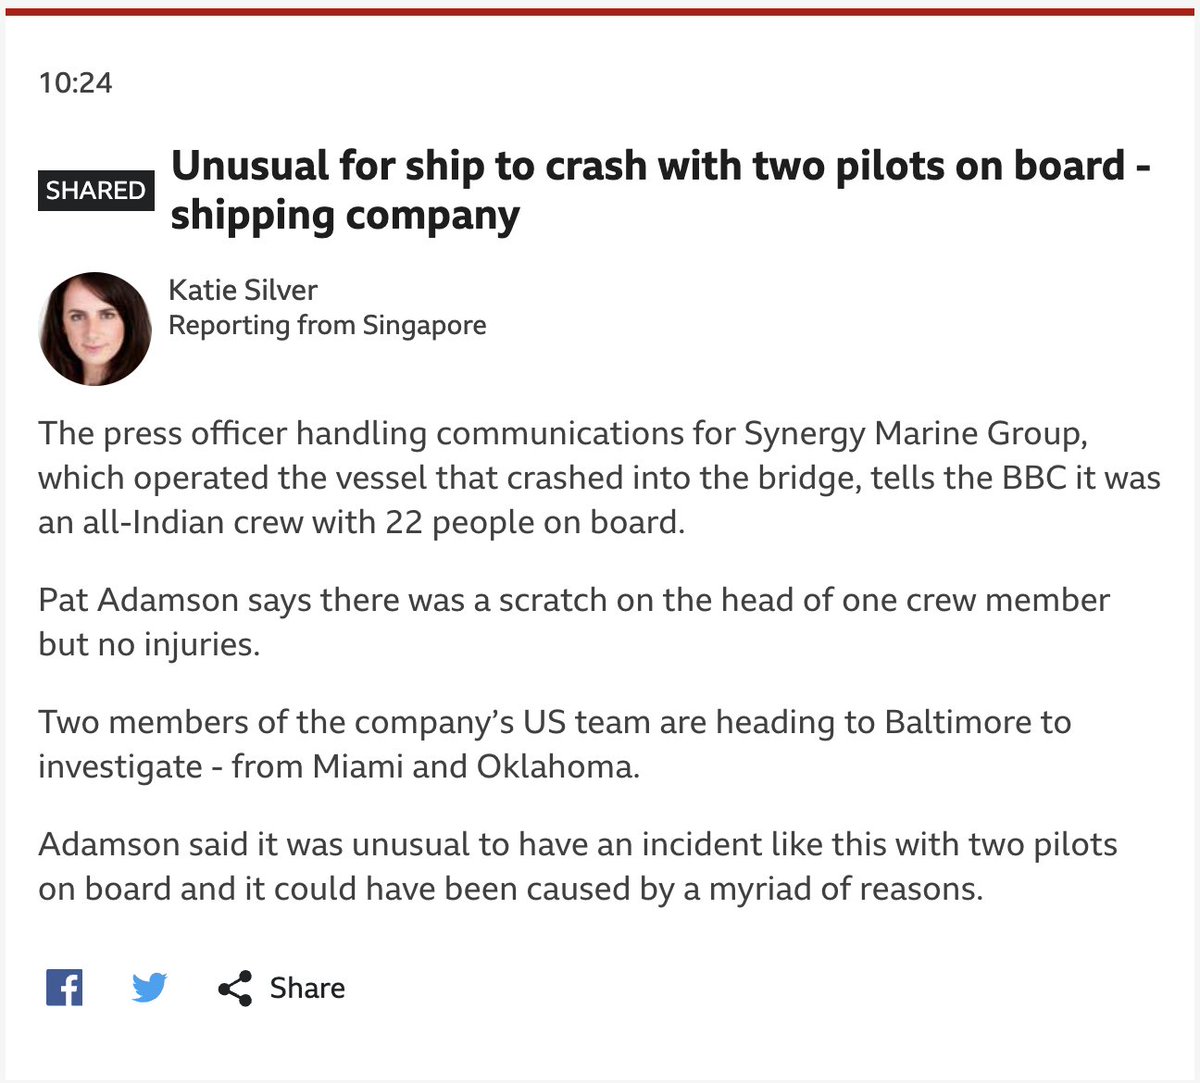 Thread: Baltimore Bridge collapse misinformation Pro-Kremlin influencers claim the captain of the Dali ship is a Ukrainian. But online records show a Ukrainian man was the Dali's captain from March to July 2016. The ship that hit the bridge reportedly had an all-Indian crew.